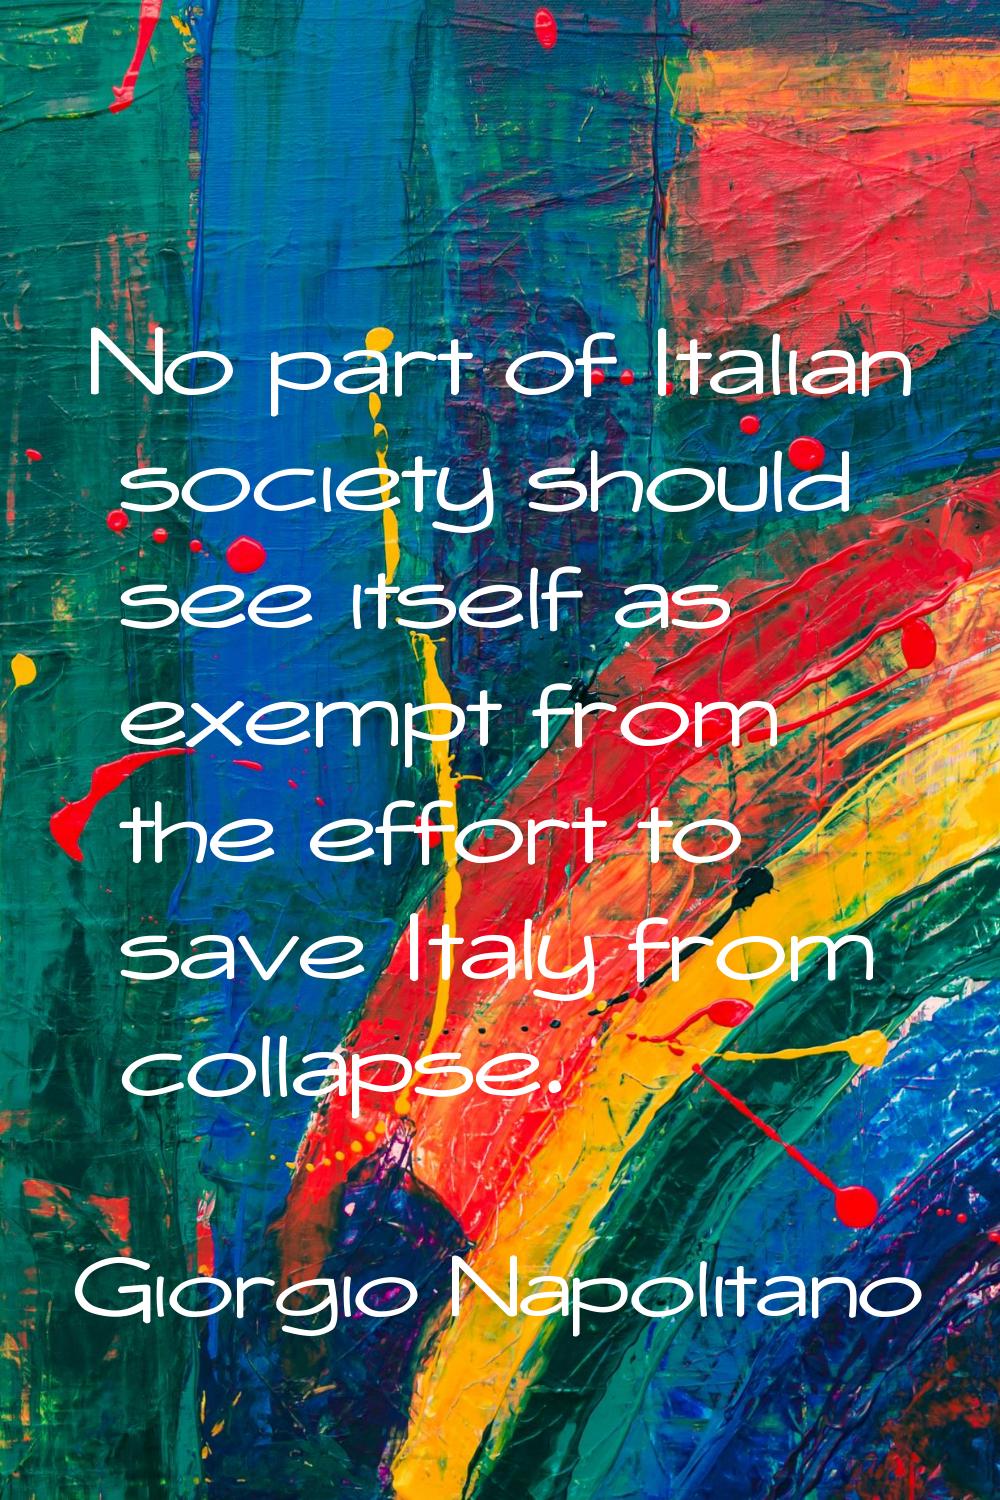 No part of Italian society should see itself as exempt from the effort to save Italy from collapse.